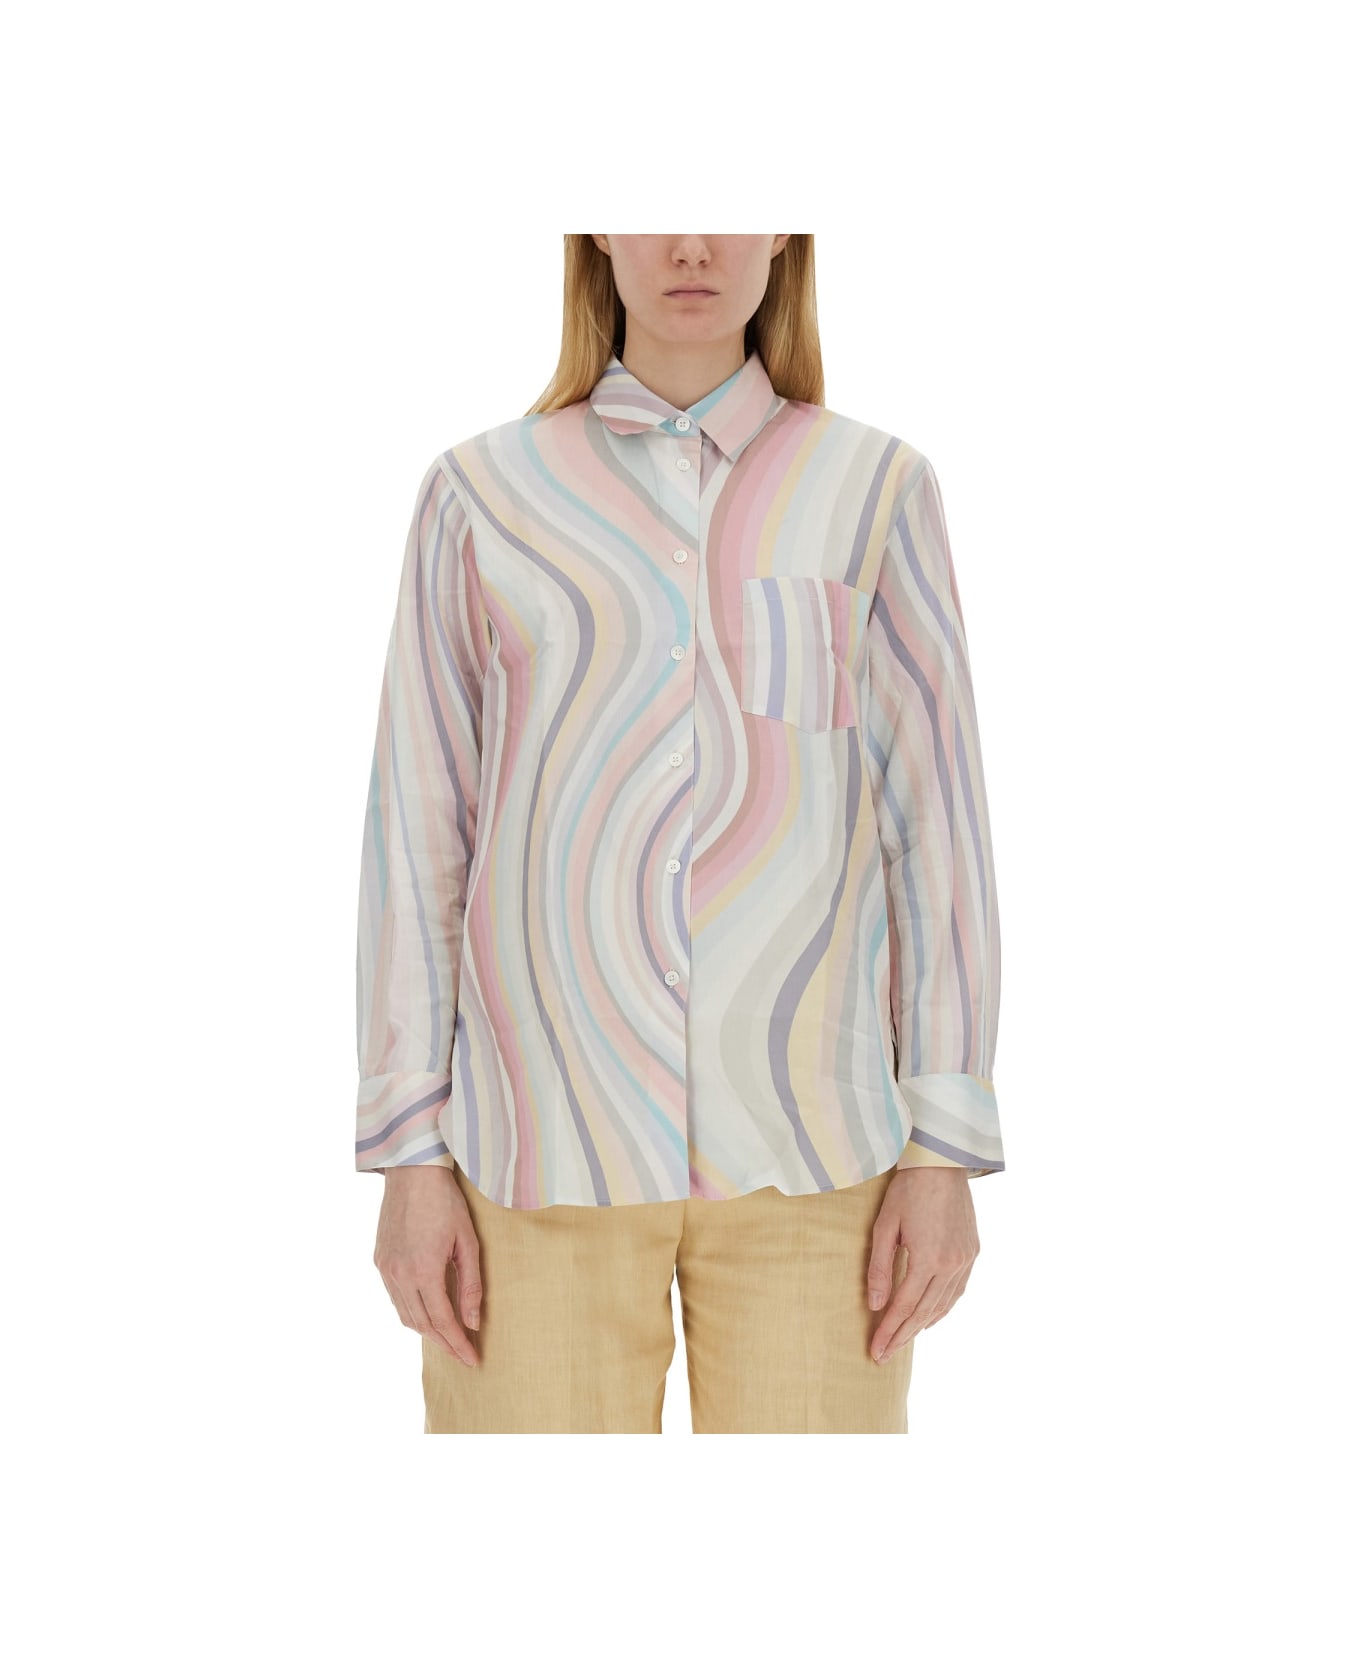 PS by Paul Smith 'faded Swirl' Shirt - MULTICOLOUR